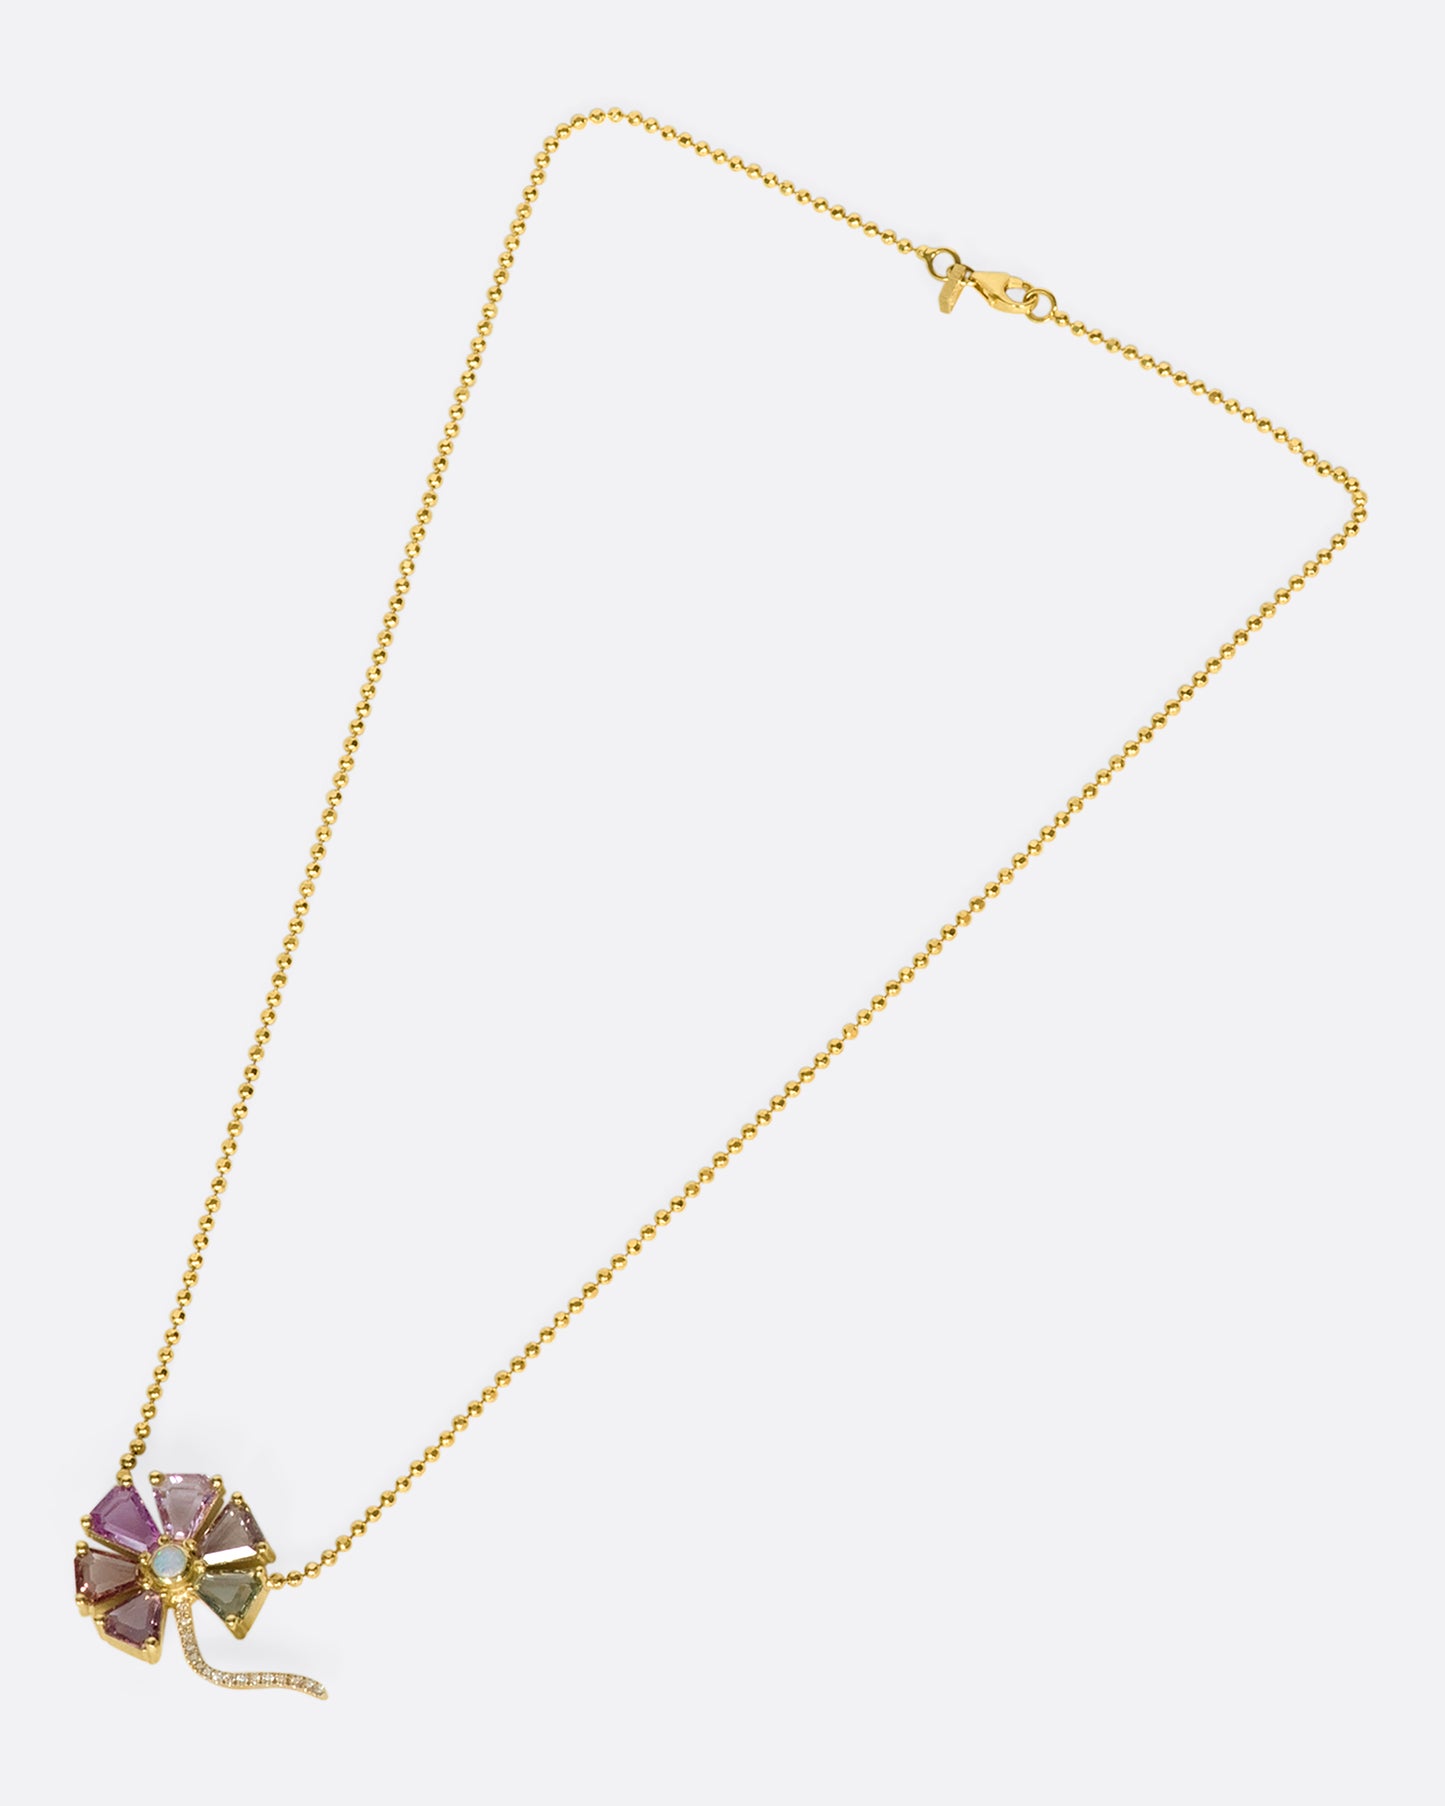 An overhead view of a flower pendant with sapphire petals, diamond stem, and opal center on a gold ball chain laying down flat.